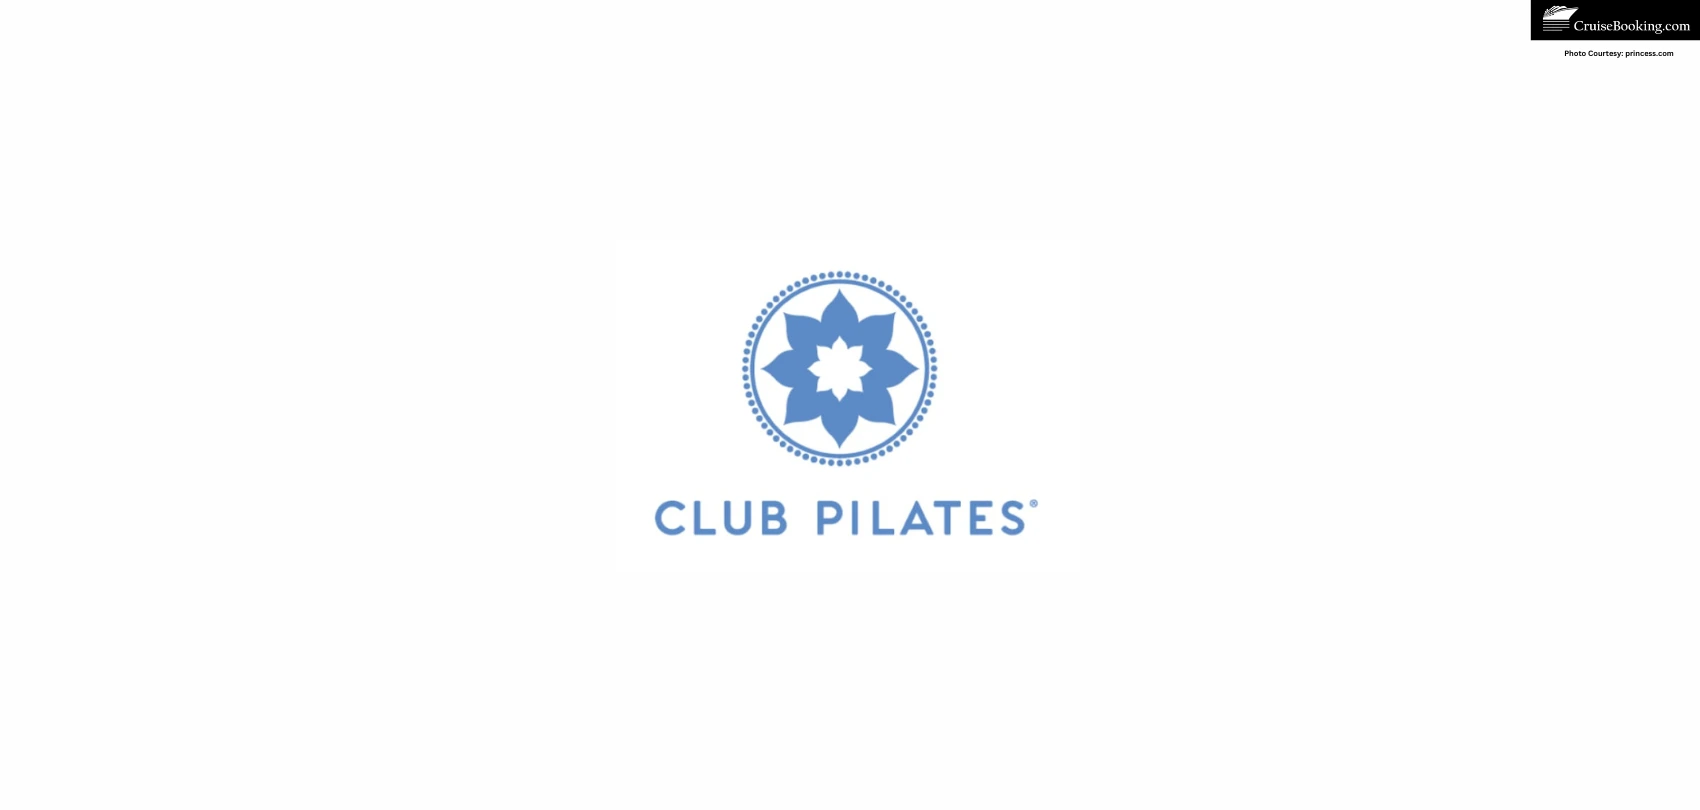 https://www.cruisebooking.com/news/wp-content/uploads/2023/07/princess-cruises-launches-first-ever-club-pilates-at-sea.webp